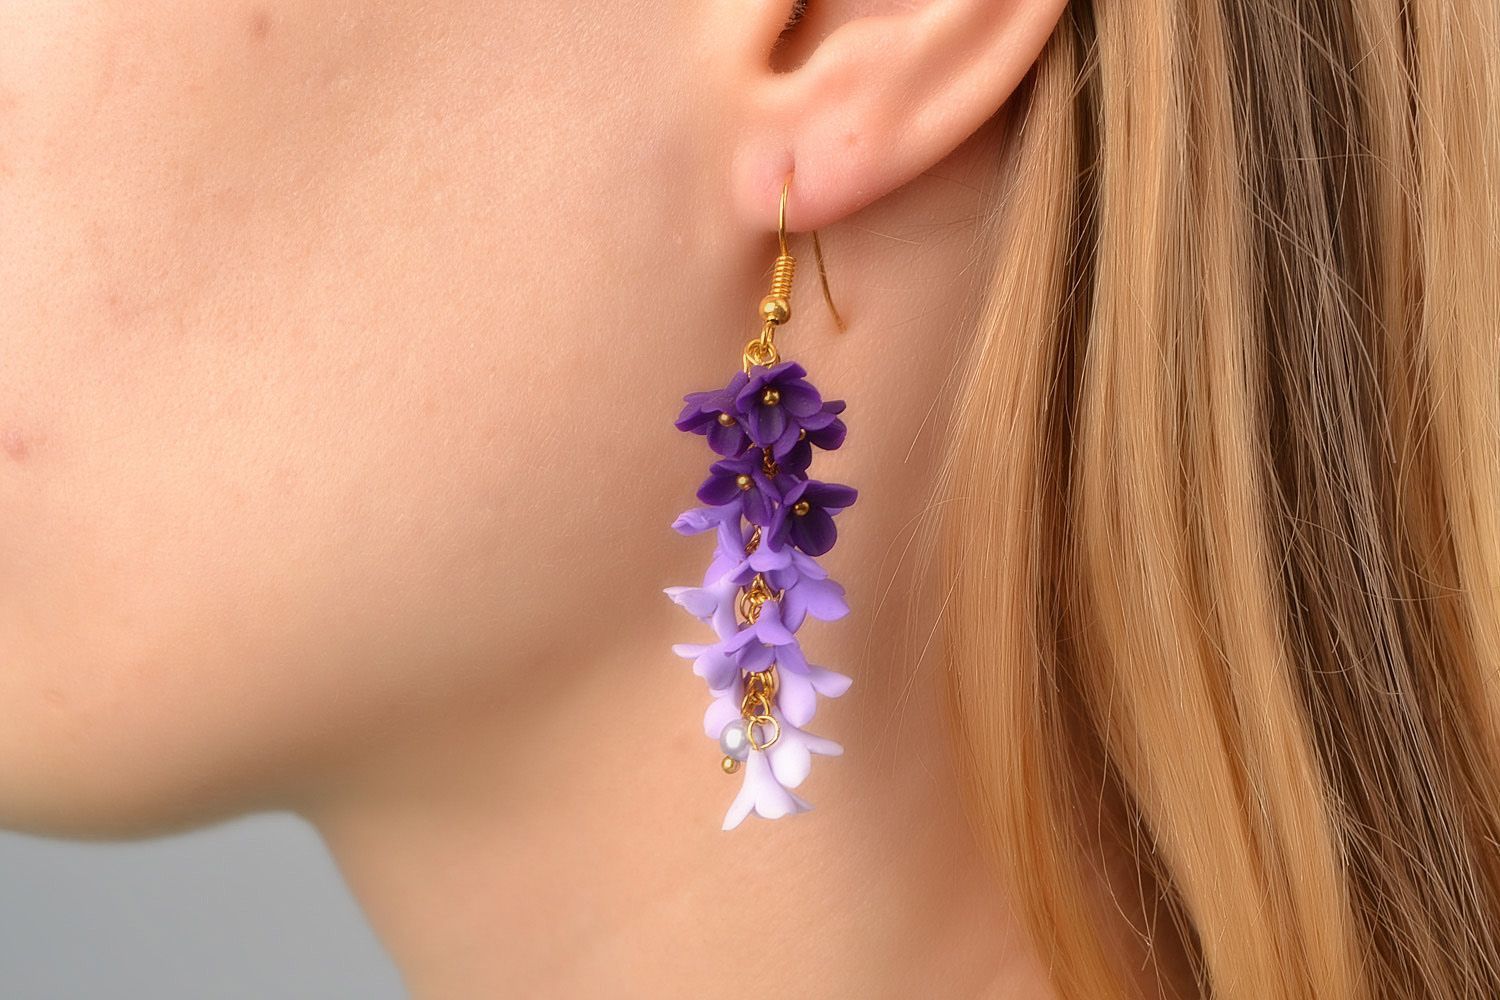 Homemade designer dangling earrings with polymer clay flowers in lilac shades photo 2